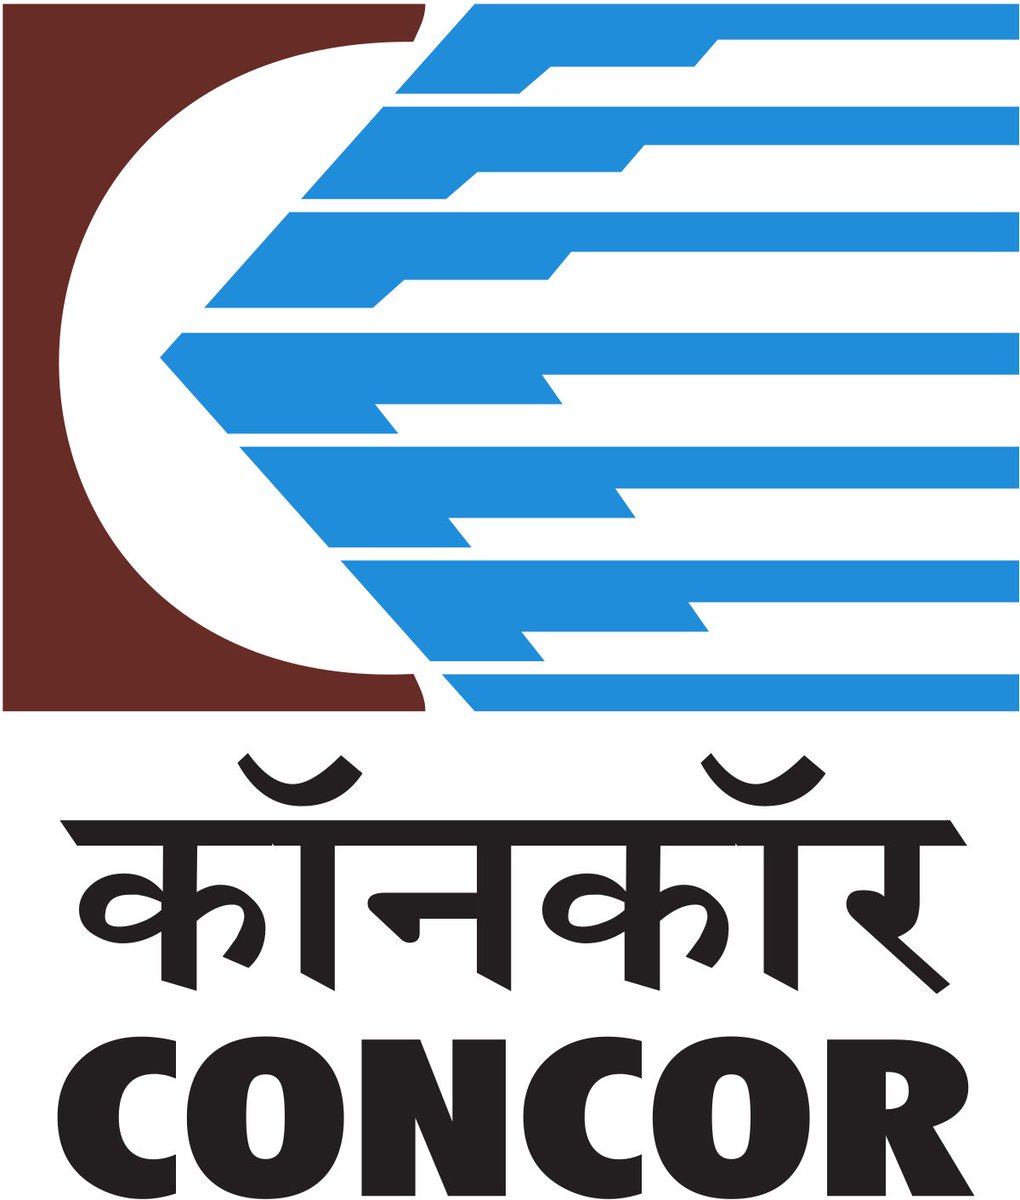 Government has respectively received about Rs 94 crore, Rs 67 crore and Rs 12 crore from NALCO, CONCOR and Bridge and Roof Company (India) Ltd as dividend tranches.